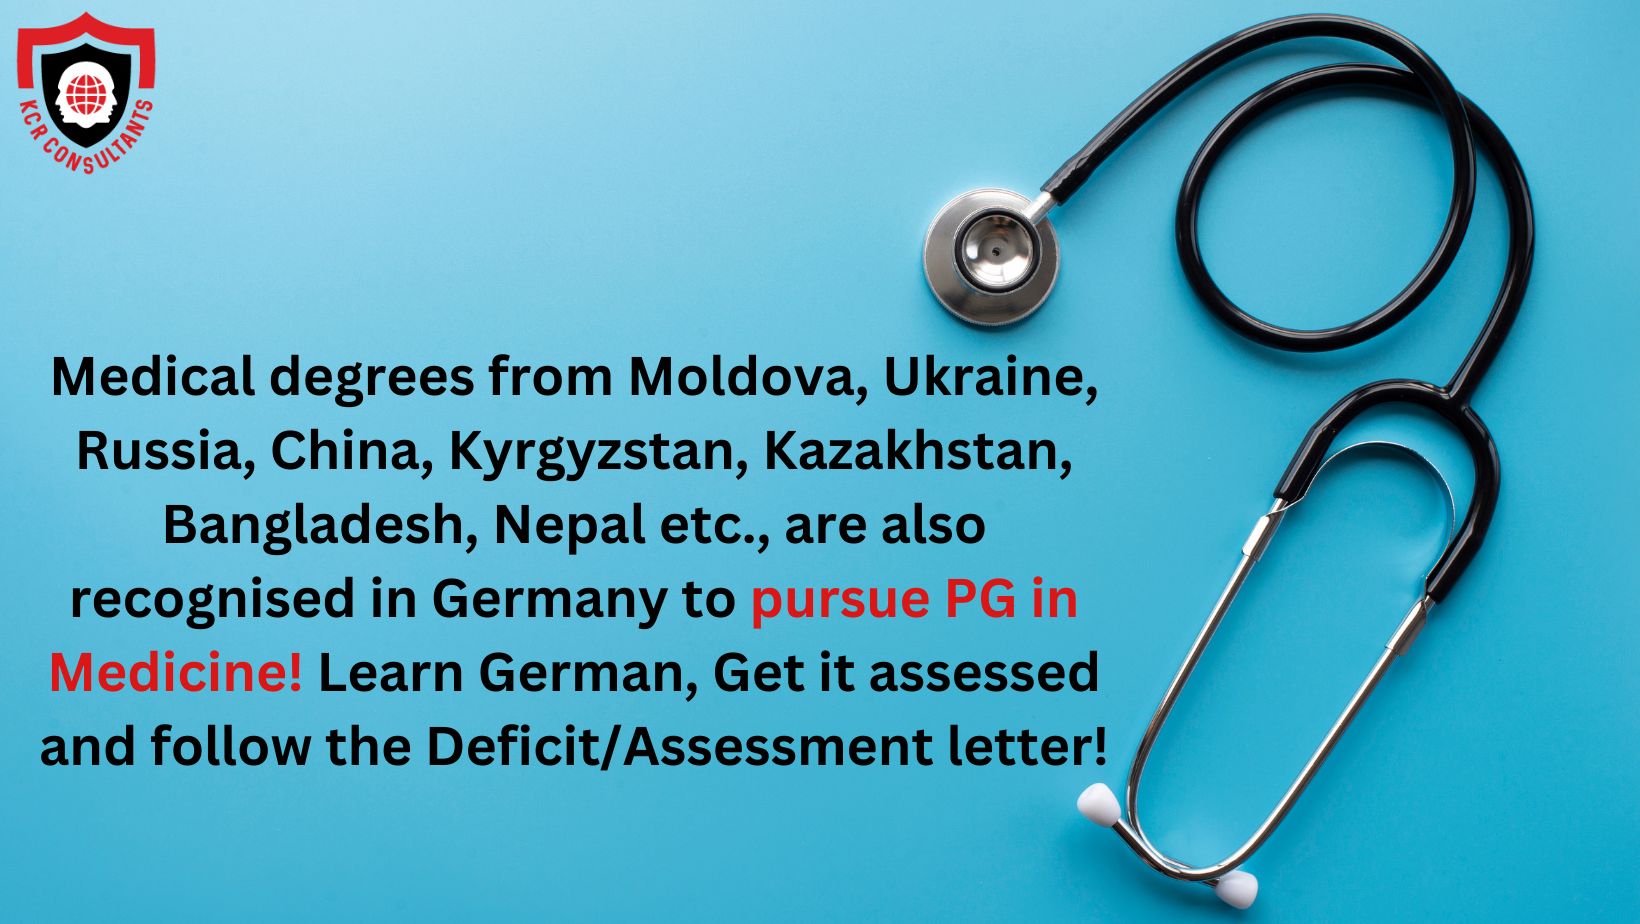 'Are Medical degrees from Moldova, Ukraine, Russia, China, Kyrgyzstan, Kazakhstan, Bangladesh, Nepal etc., recognised in Germany to pursue PG in Medicine?